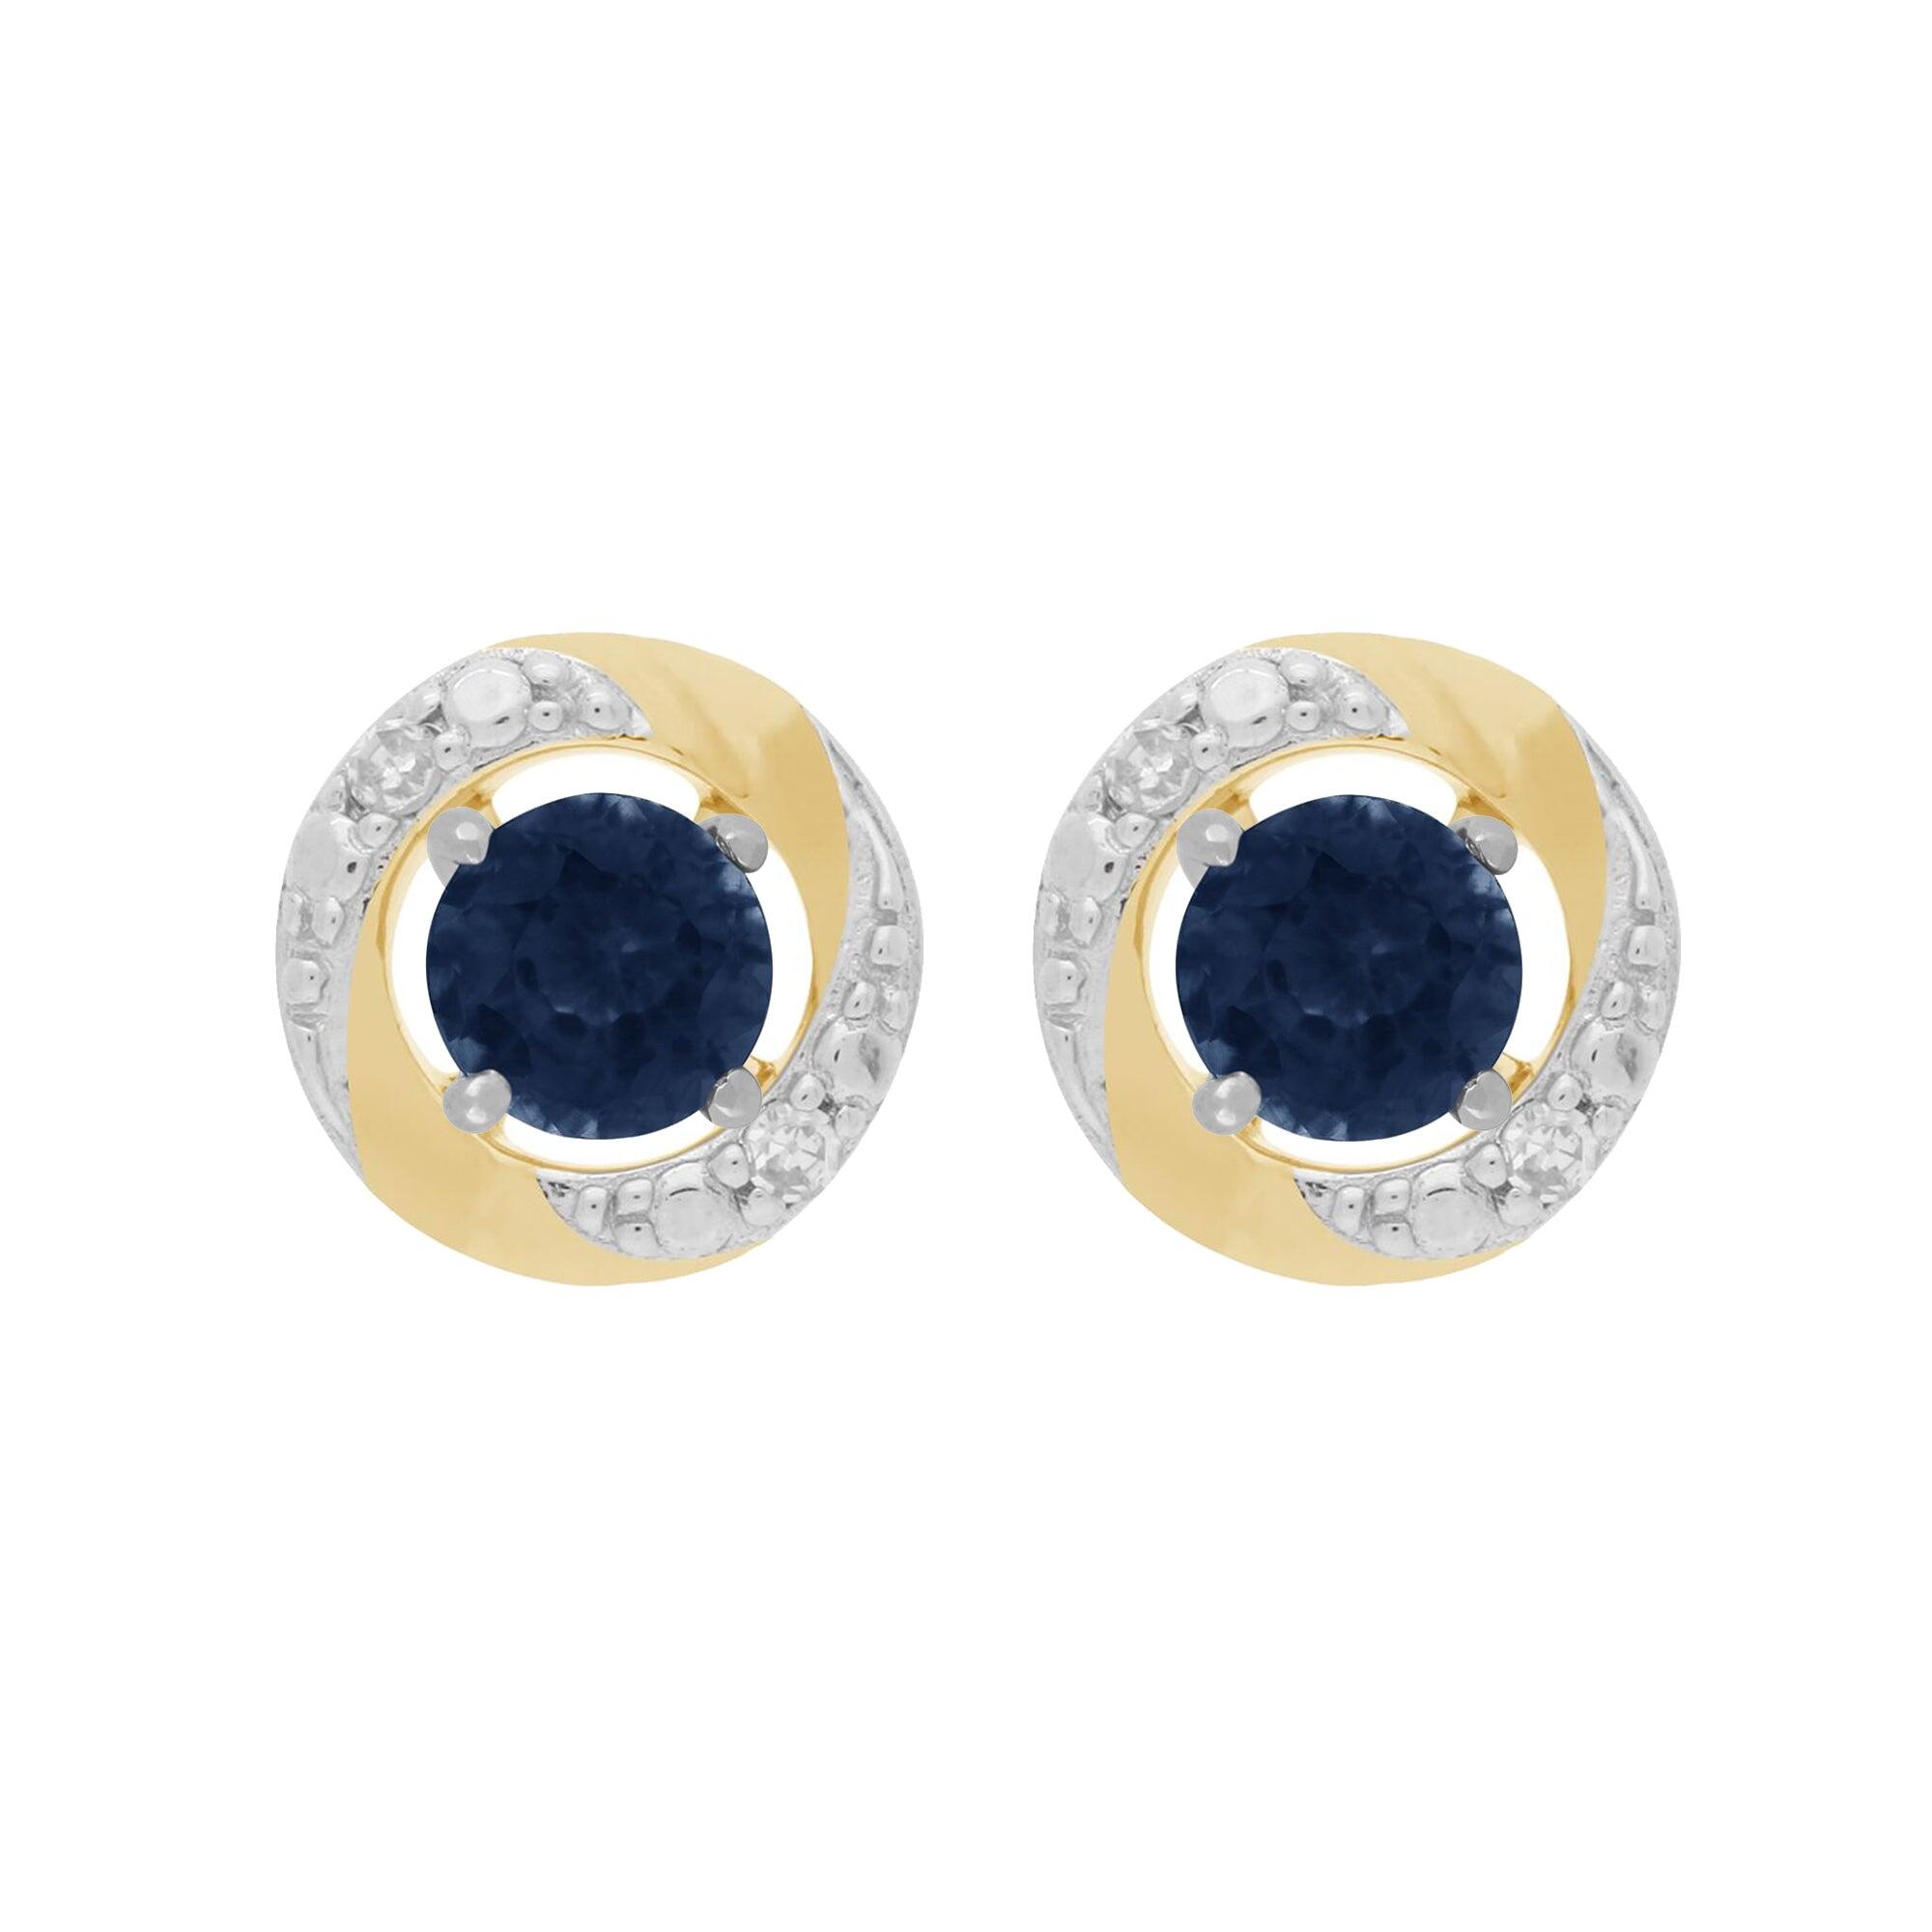 9ct White Gold Blue Sapphire Stud Earrings with Detachable Diamond Halo Ear Jacket in 9ct Yellow Gold